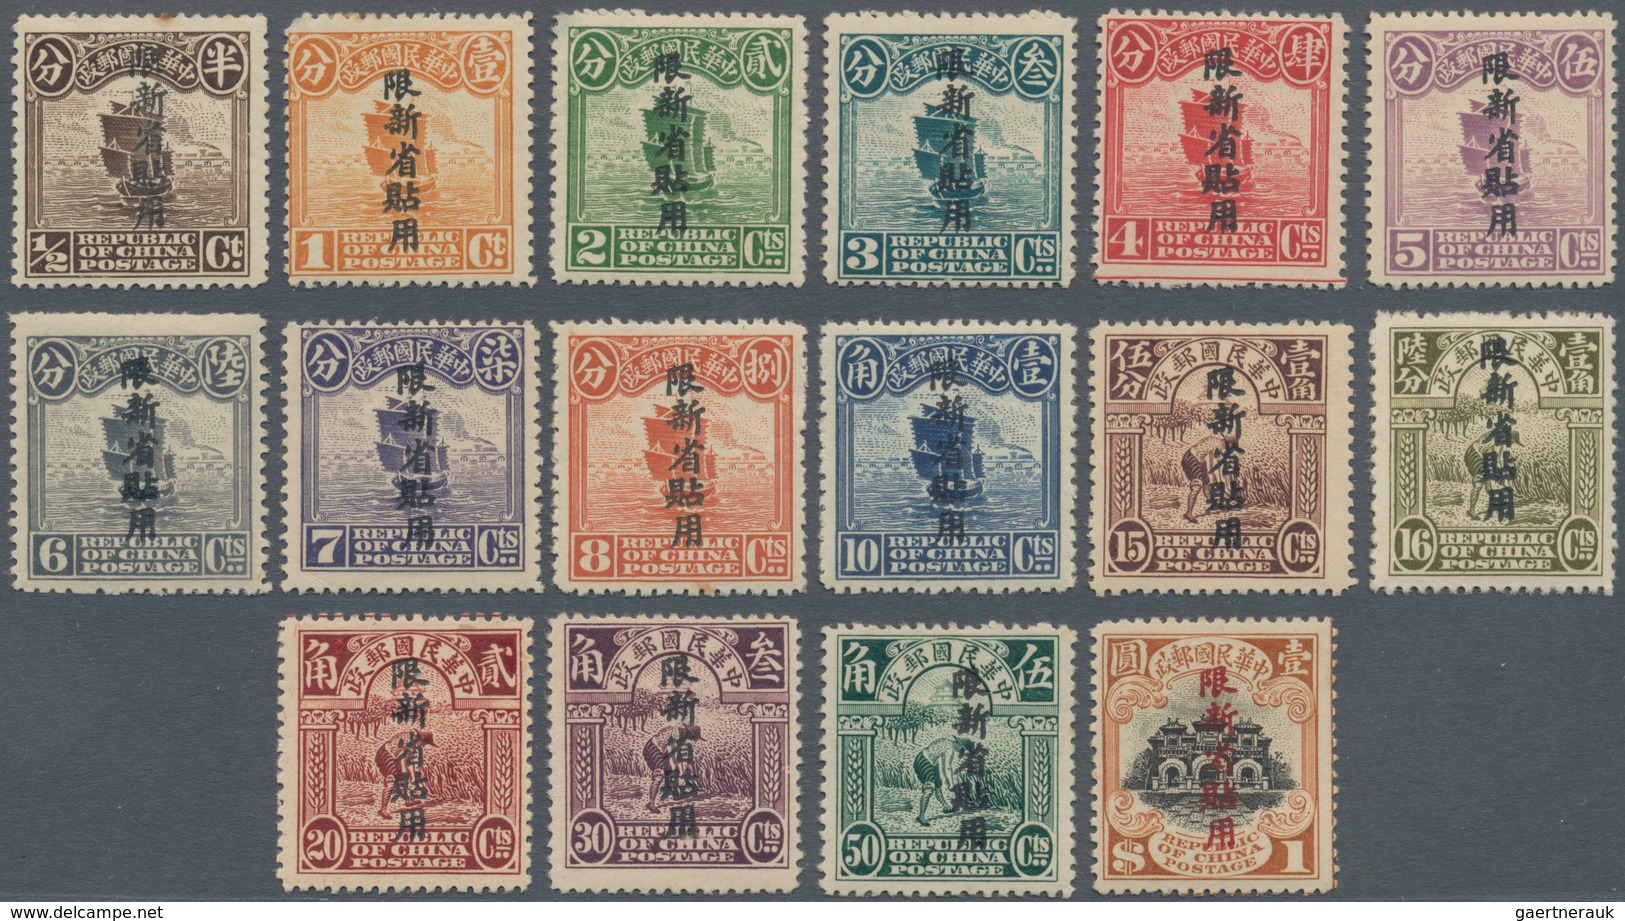 China - Provinzausgaben - Sinkiang (1915/45): 1915, Type I Surcharge, 1st Character Not In Alignment - Xinjiang 1915-49